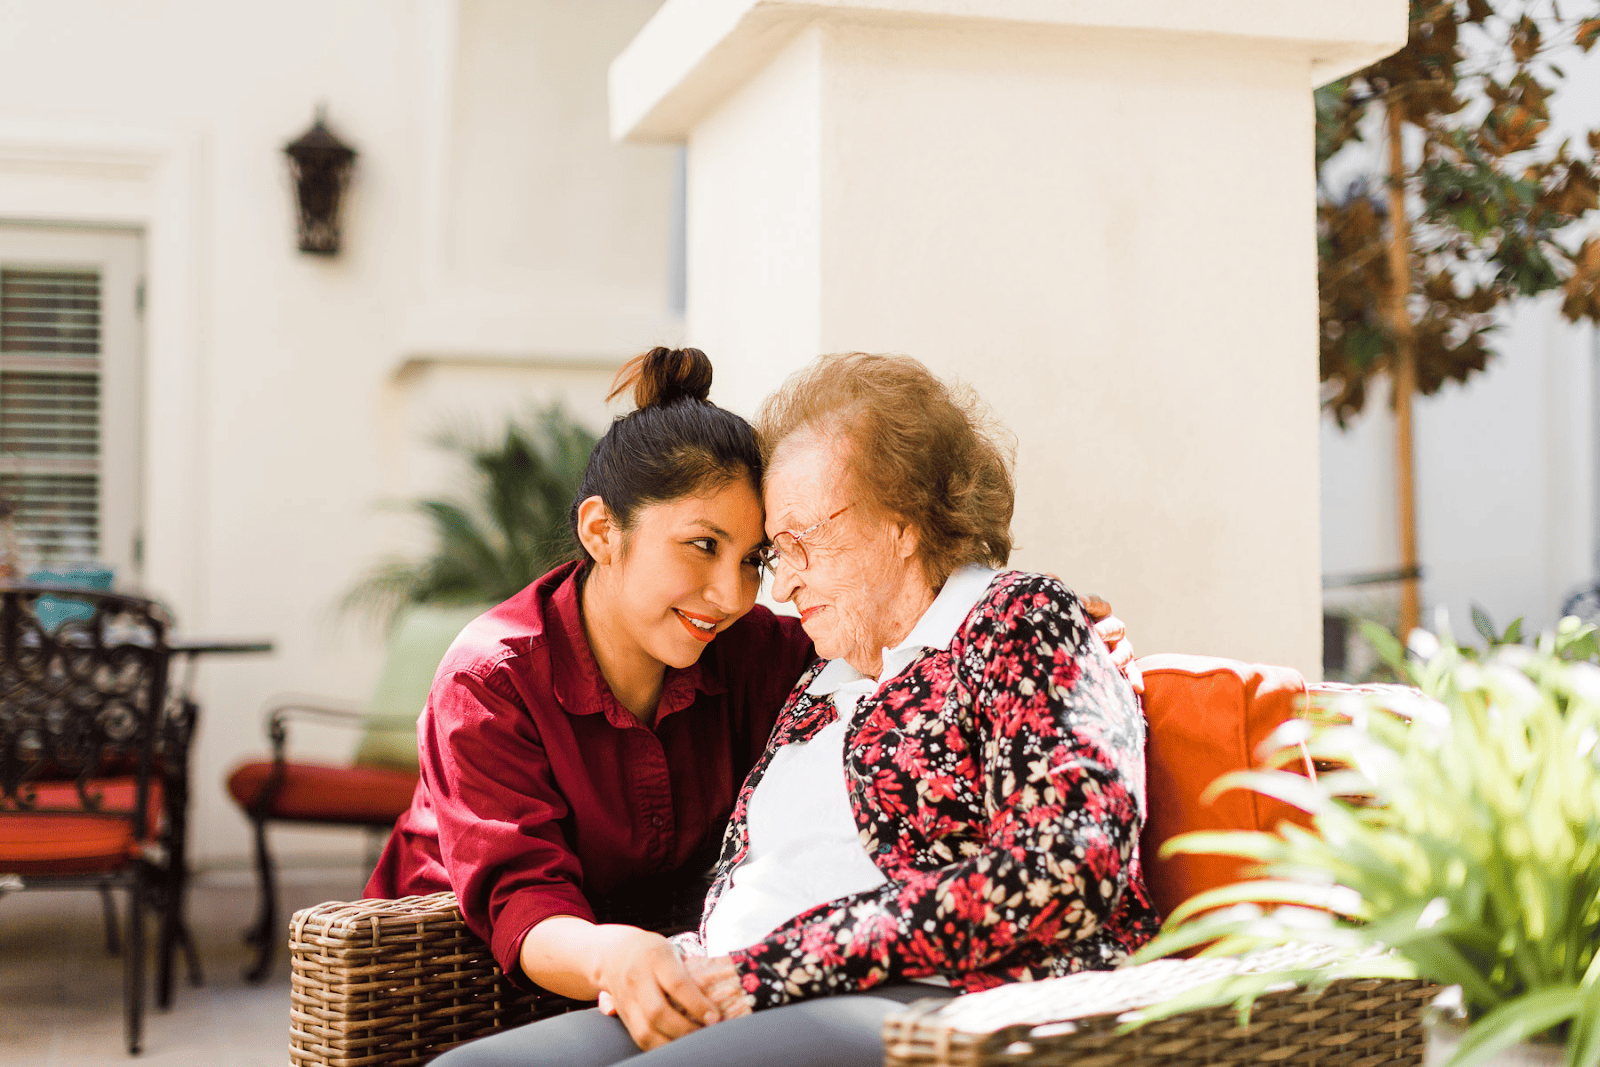 How Positive Approach to Care Methods Help Caregivers with Dementia Behavior